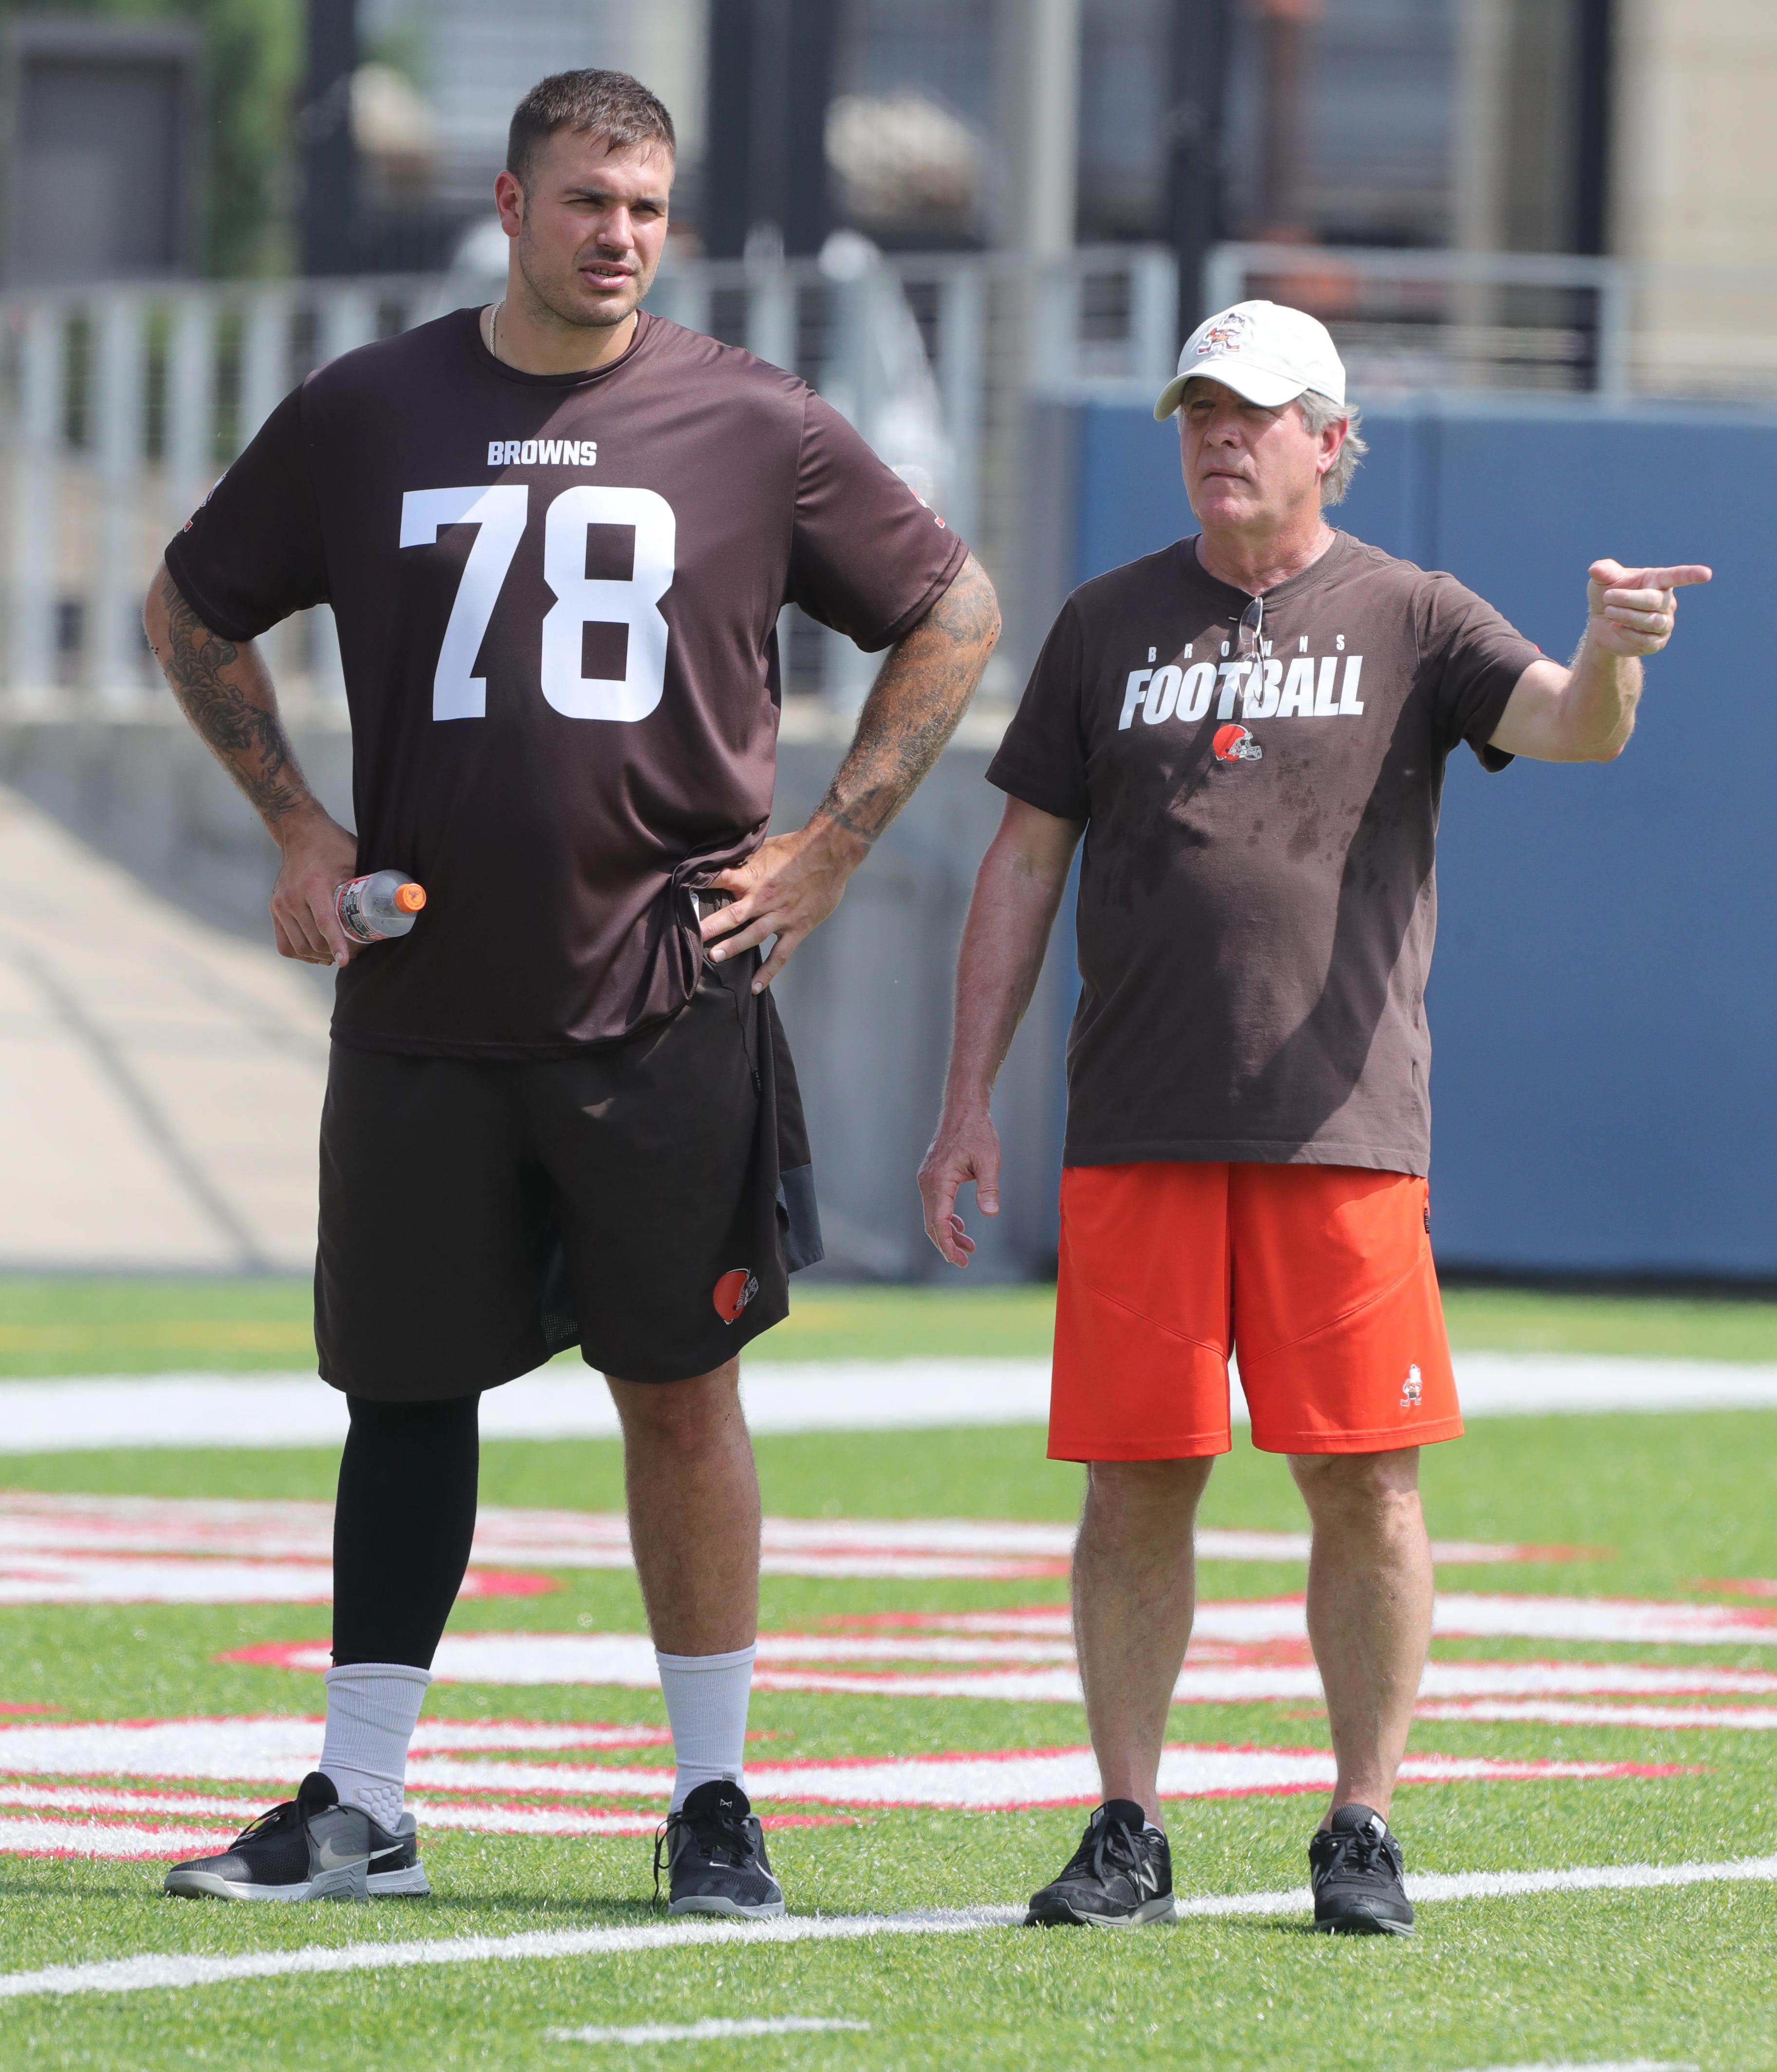 Cleveland Browns offensive lineman Jack Conklin talks with coach Bill Callahan during minicamp on Wednesday, June 15, 2022 in Canton, Ohio, at Tom Benson Hall of Fame Stadium.